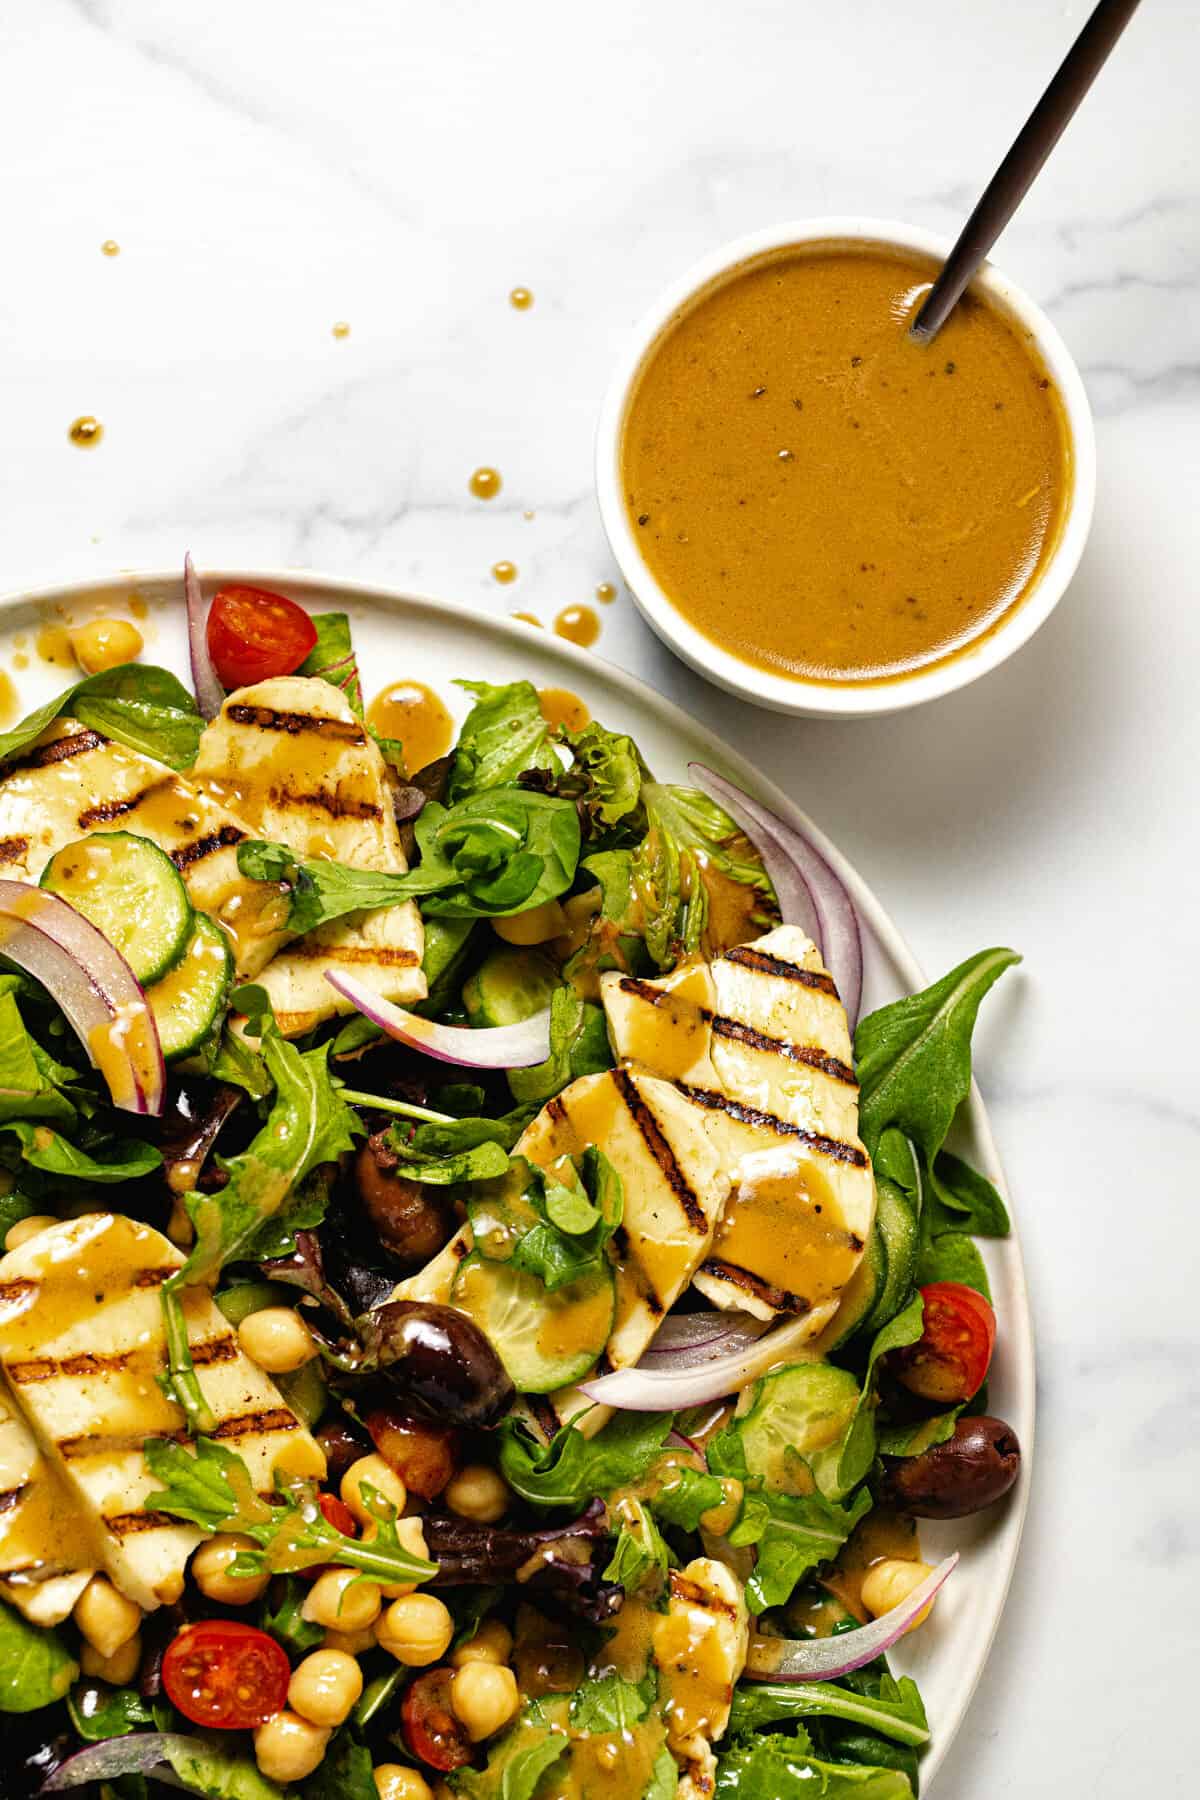 Overhead shot of a bowl of balsamic dressing and a grilled halloumi salad